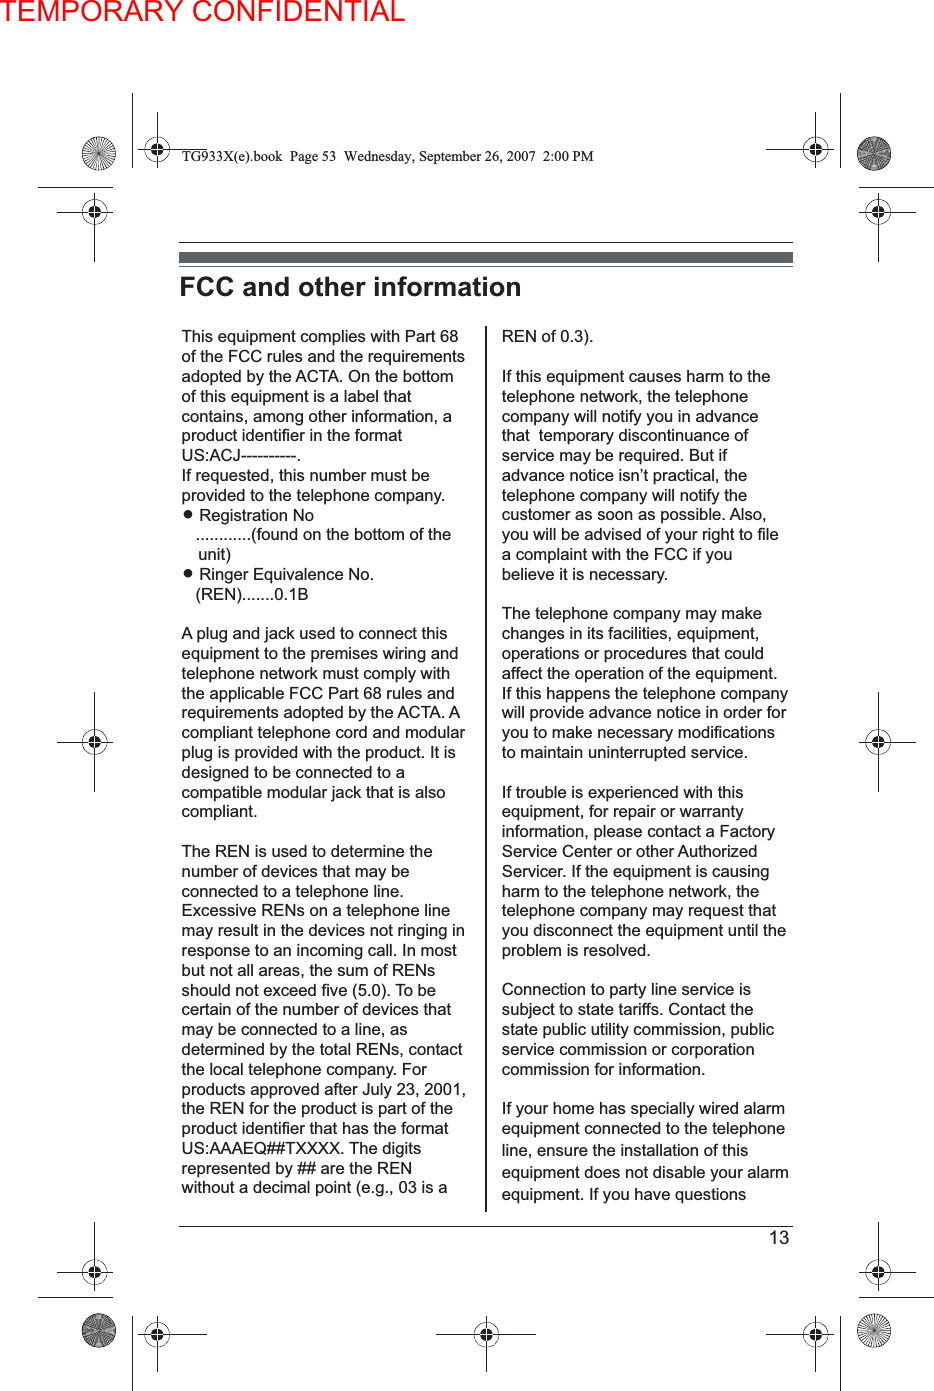 TEMPORARY CONFIDENTIAL13FCC and other informationThis equipment complies with Part 68 of the FCC rules and the requirements adopted by the ACTA. On the bottom of this equipment is a label that contains, among other information, a product identifier in the format US:ACJ----------.If requested, this number must be provided to the telephone company.L Registration No   ............(found on the bottom of the unit)L Ringer Equivalence No.   (REN).......0.1BA plug and jack used to connect this equipment to the premises wiring and telephone network must comply with the applicable FCC Part 68 rules and requirements adopted by the ACTA. Acompliant telephone cord and modular plug is provided with the product. It is designed to be connected to a compatible modular jack that is also compliant.The REN is used to determine the number of devices that may be connected to a telephone line. Excessive RENs on a telephone line may result in the devices not ringing in response to an incoming call. In most but not all areas, the sum of RENs should not exceed five (5.0). To be certain of the number of devices that may be connected to a line, as determined by the total RENs, contact the local telephone company. For products approved after July 23, 2001, the REN for the product is part of the product identifier that has the format US:AAAEQ##TXXXX. The digitsrepresented by ## are the REN without a decimal point (e.g., 03 is a REN of 0.3).If this equipment causes harm to the telephone network, the telephone company will notify you in advance that  temporary discontinuance of service may be required. But if advance notice isn’t practical, the telephone company will notify the customer as soon as possible. Also,you will be advised of your right to file a complaint with the FCC if you believe it is necessary.The telephone company may make changes in its facilities, equipment, operations or procedures that could affect the operation of the equipment. If this happens the telephone company will provide advance notice in order for you to make necessary modifications to maintain uninterrupted service.If trouble is experienced with this equipment, for repair or warranty information, please contact a Factory Service Center or other AuthorizedServicer. If the equipment is causing harm to the telephone network, the telephone company may request that you disconnect the equipment until the problem is resolved.Connection to party line service is subject to state tariffs. Contact the state public utility commission, public service commission or corporation commission for information.If your home has specially wired alarm equipment connected to the telephone line, ensure the installation of this equipment does not disable your alarm equipment. If you have questions TG933X(e).book  Page 53  Wednesday, September 26, 2007 2:00 PM